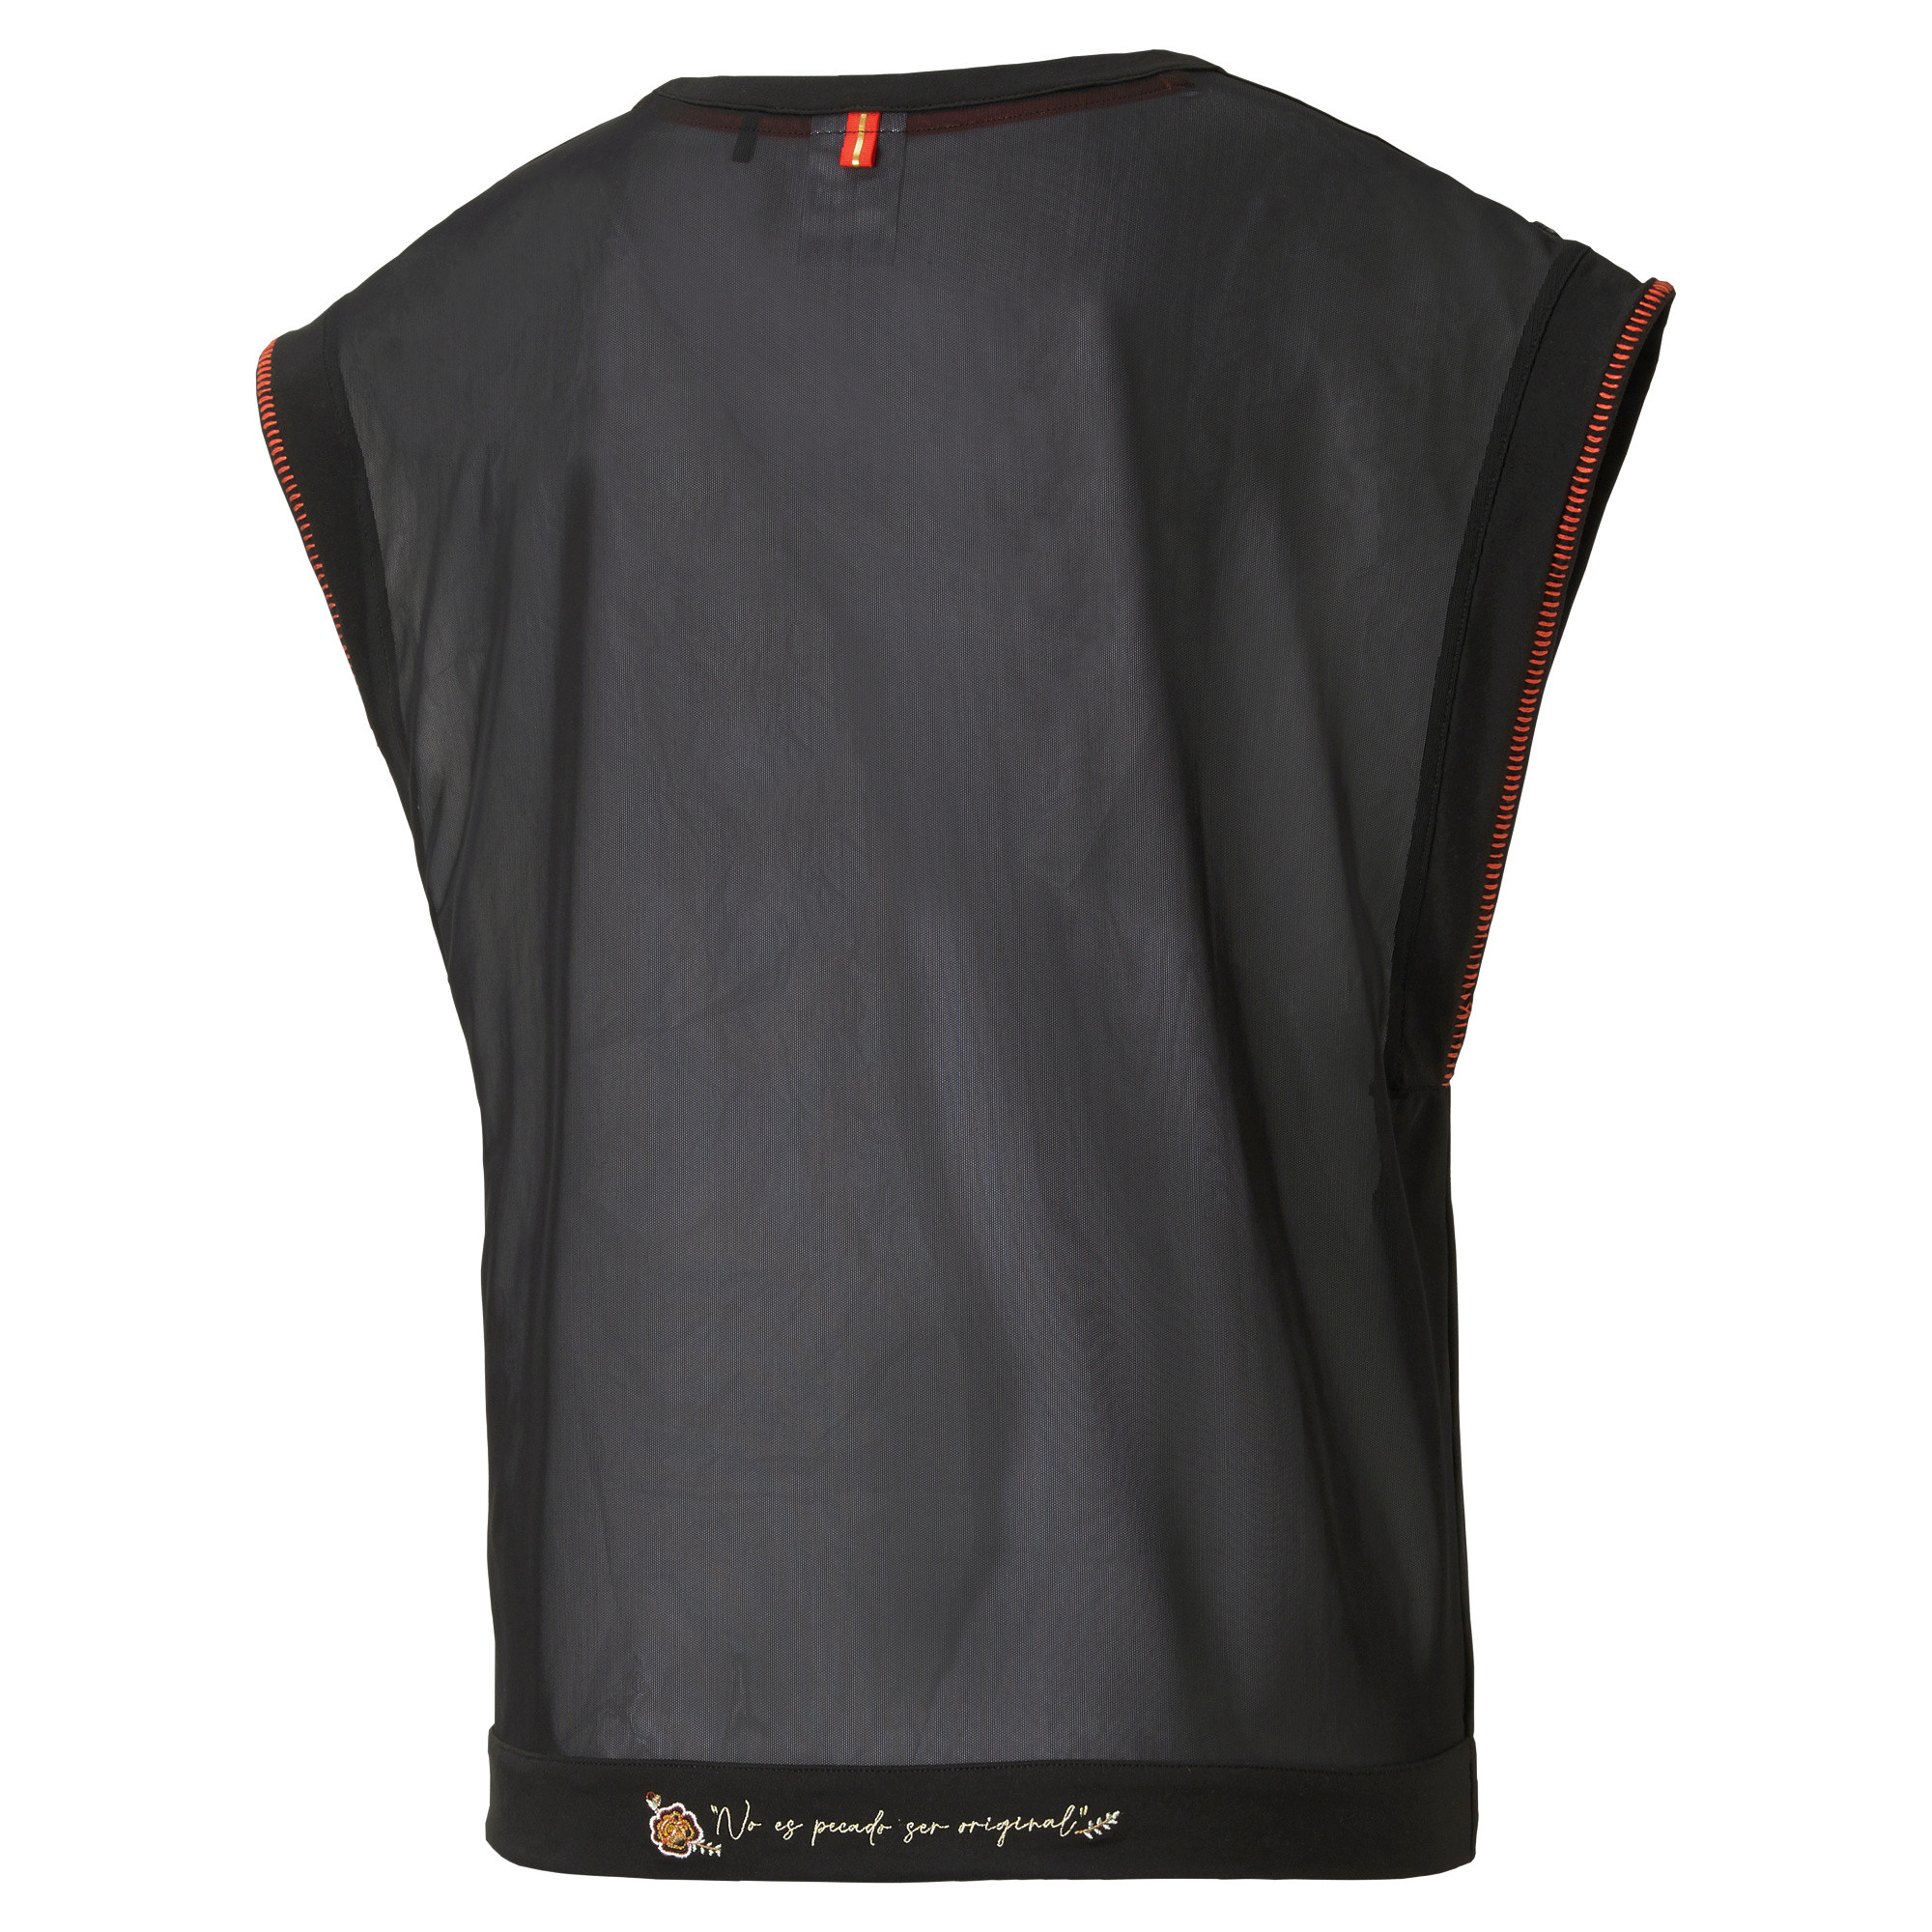 Training Tee in drycell, Black, large image number 1